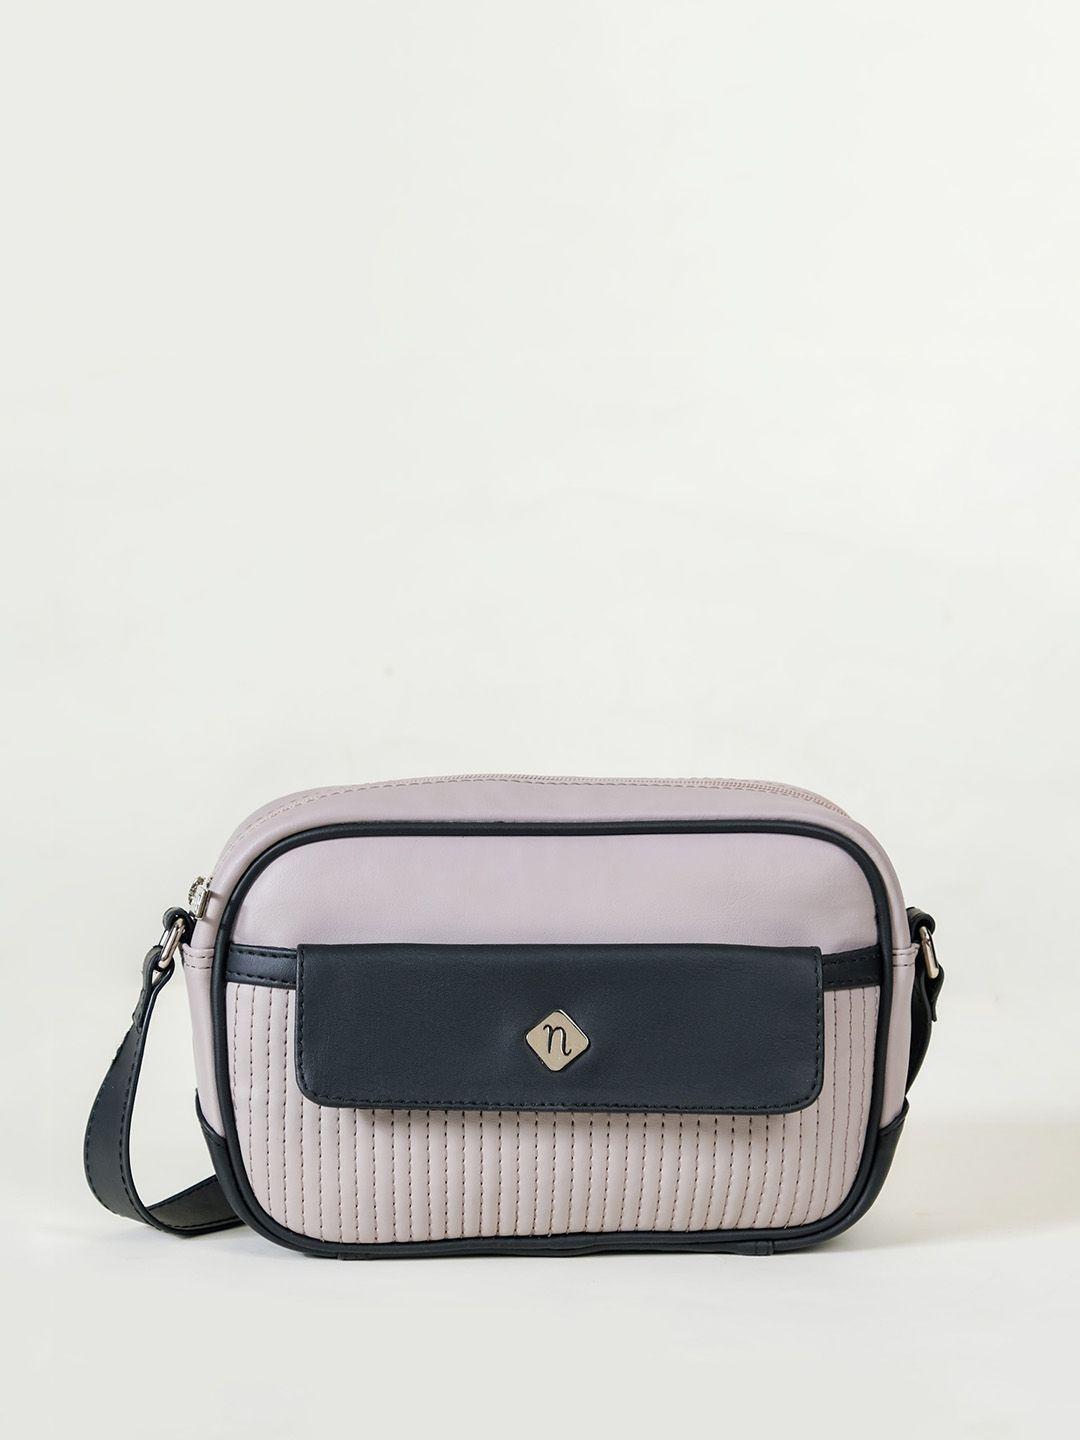 nestasia colourblocked structured sling bag with quilted